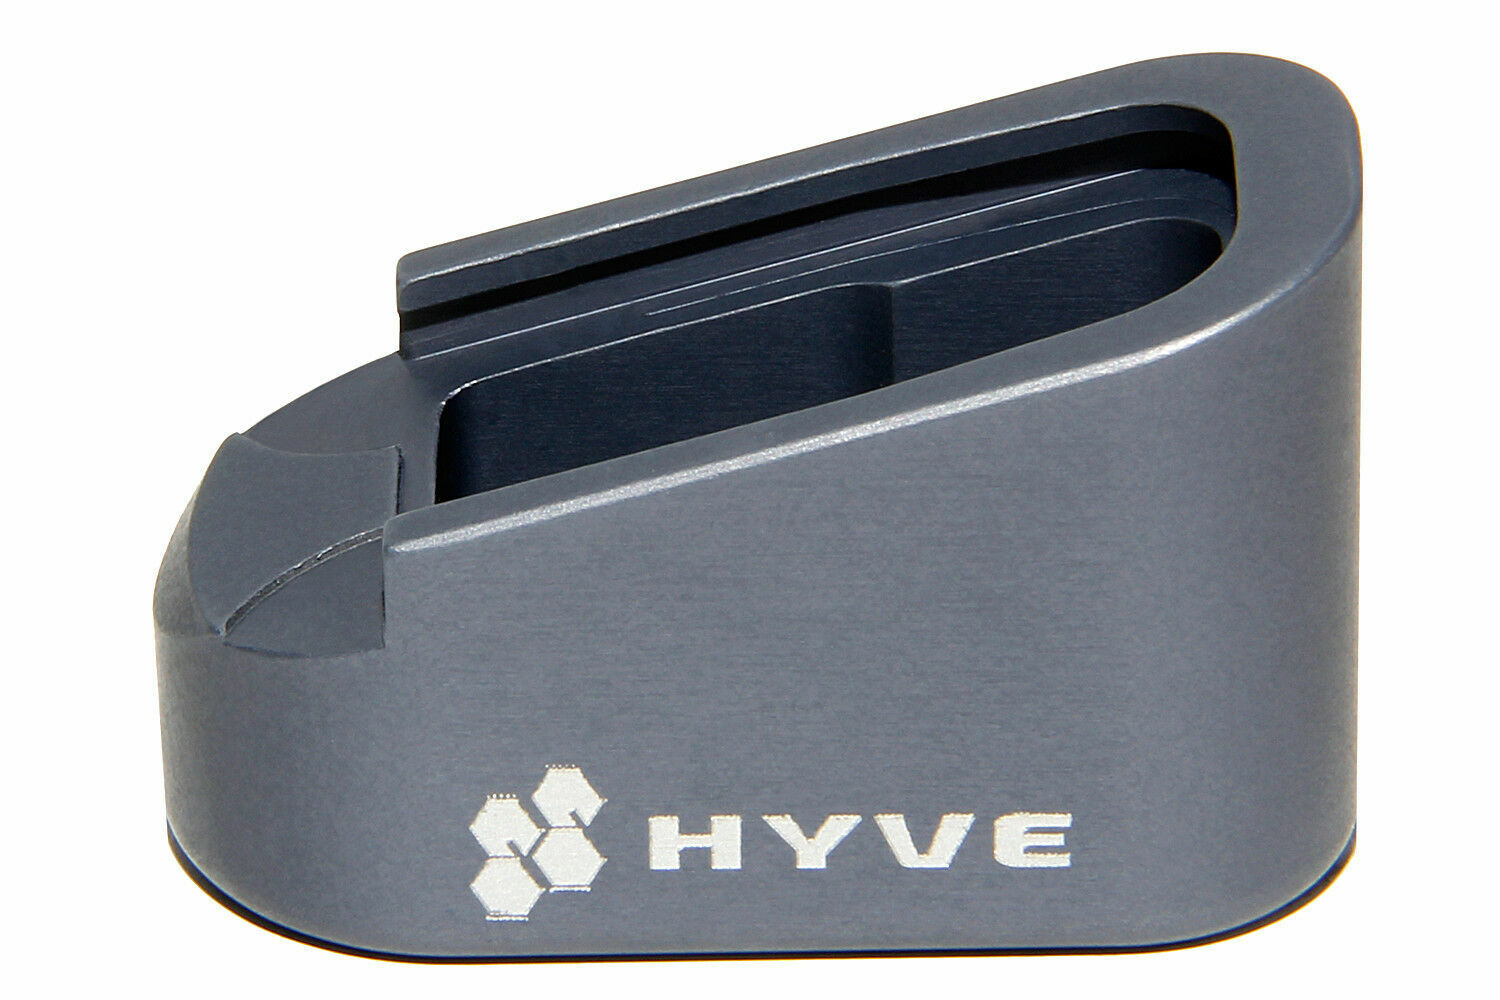 Hyve Technologies 43 +2 Mag Extension base pad for the Glock 43